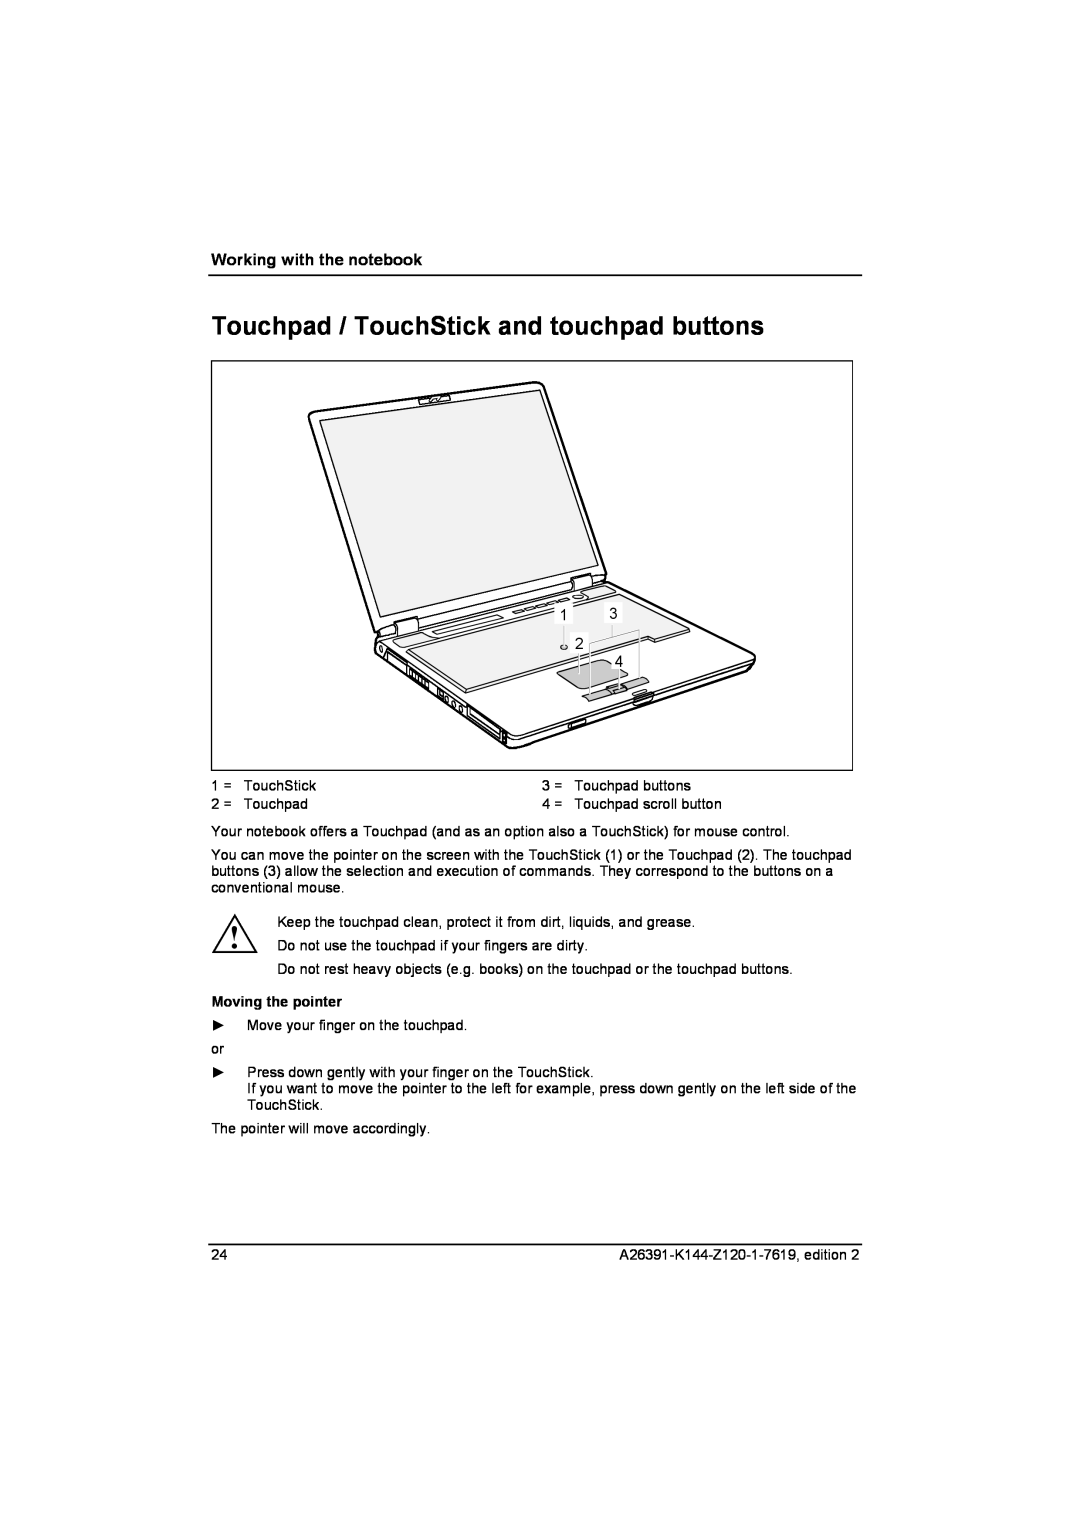 Fujitsu S SERIES manual Touchpad / TouchStick and touchpad buttons, Moving the pointer, Working with the notebook 